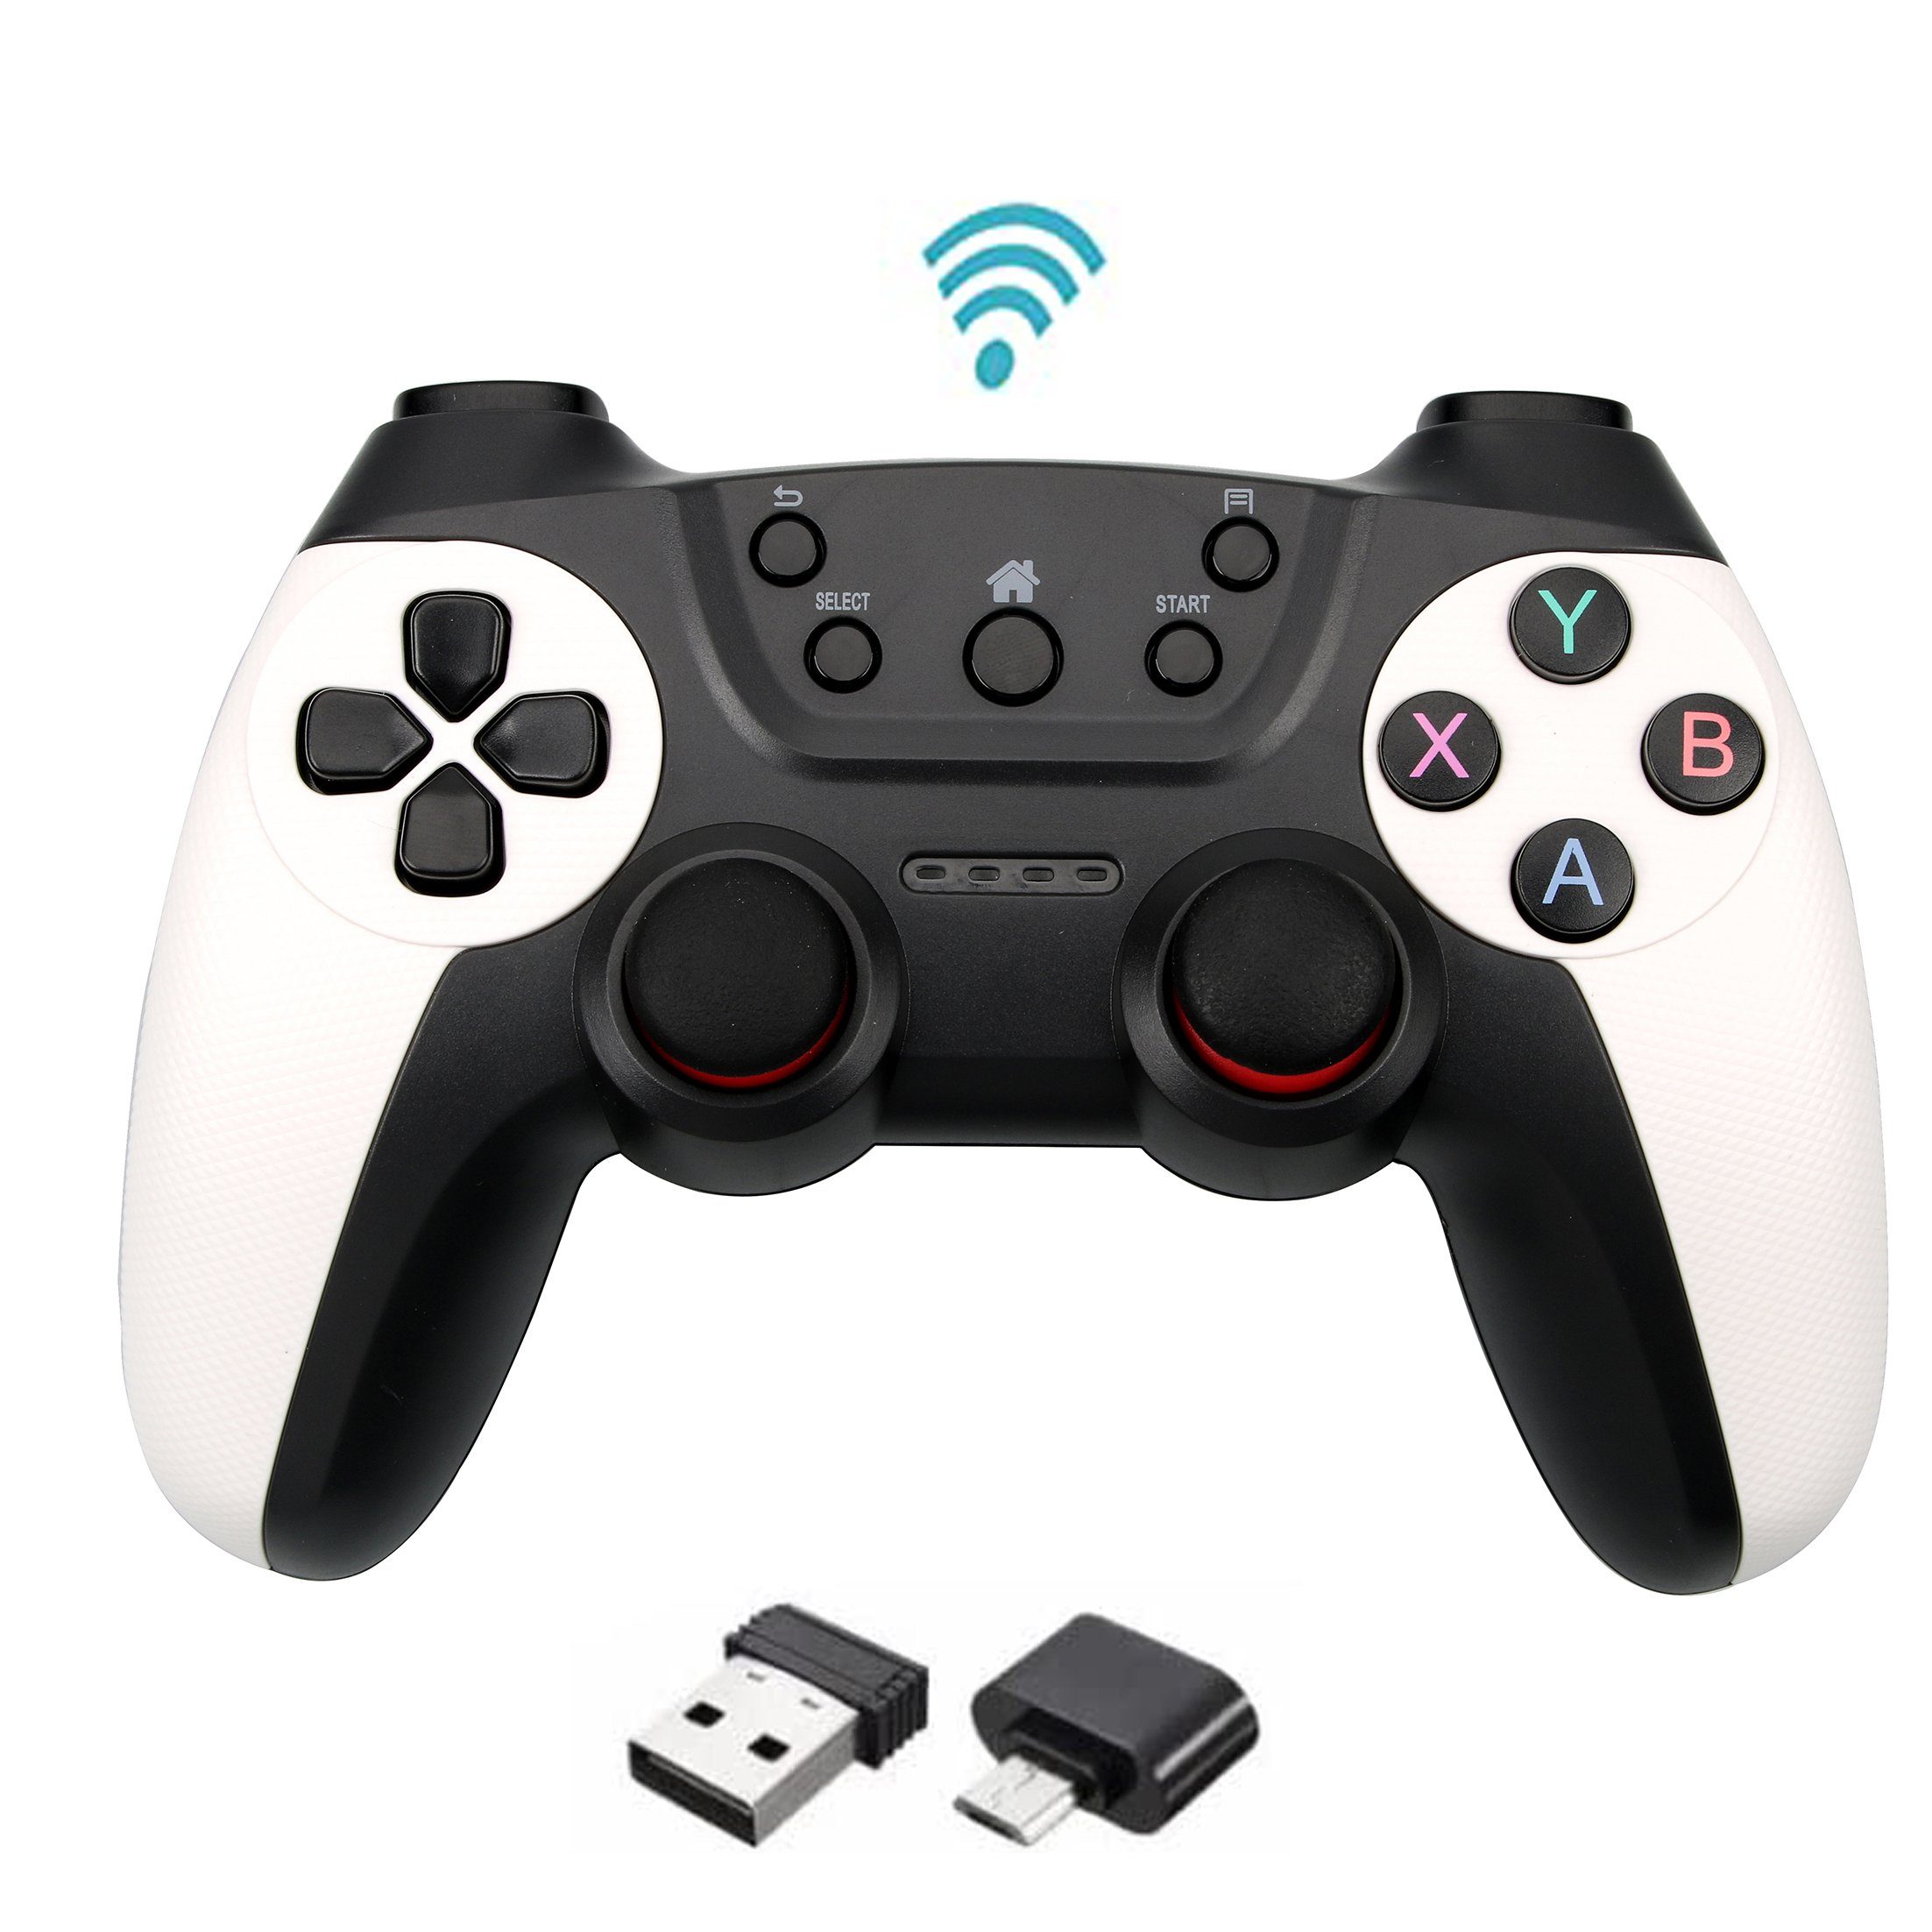 Tadow Android Gamepad,Gamecontroller,2.4G drahtlose Übertragung,Wireless  Gamepad (für Android/PC/PS2/PS3/Switch)